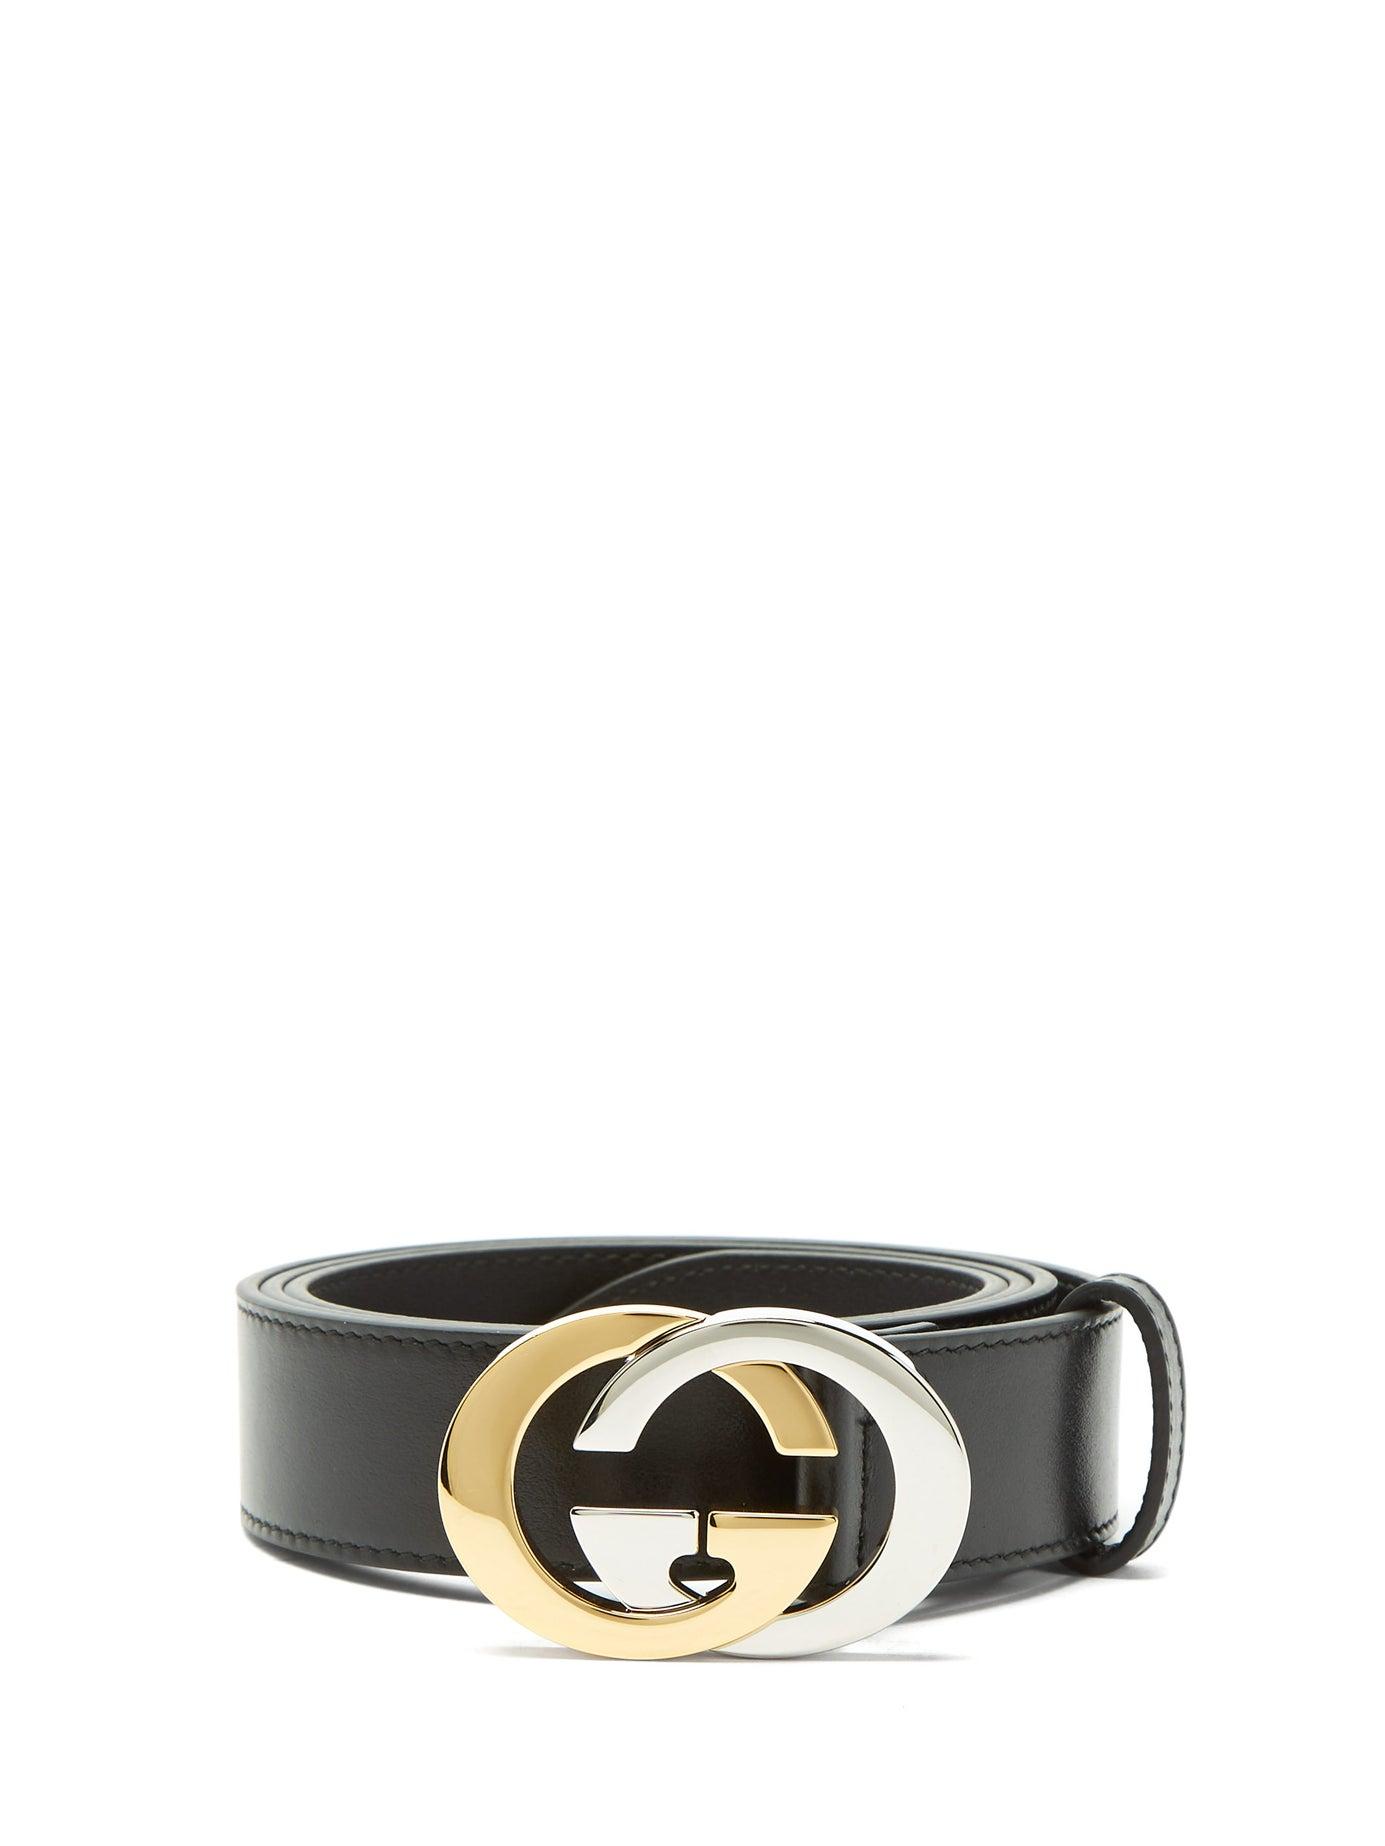 Gucci Two-tone Metal Interlocking G Leather Belt in Black for Men - Lyst